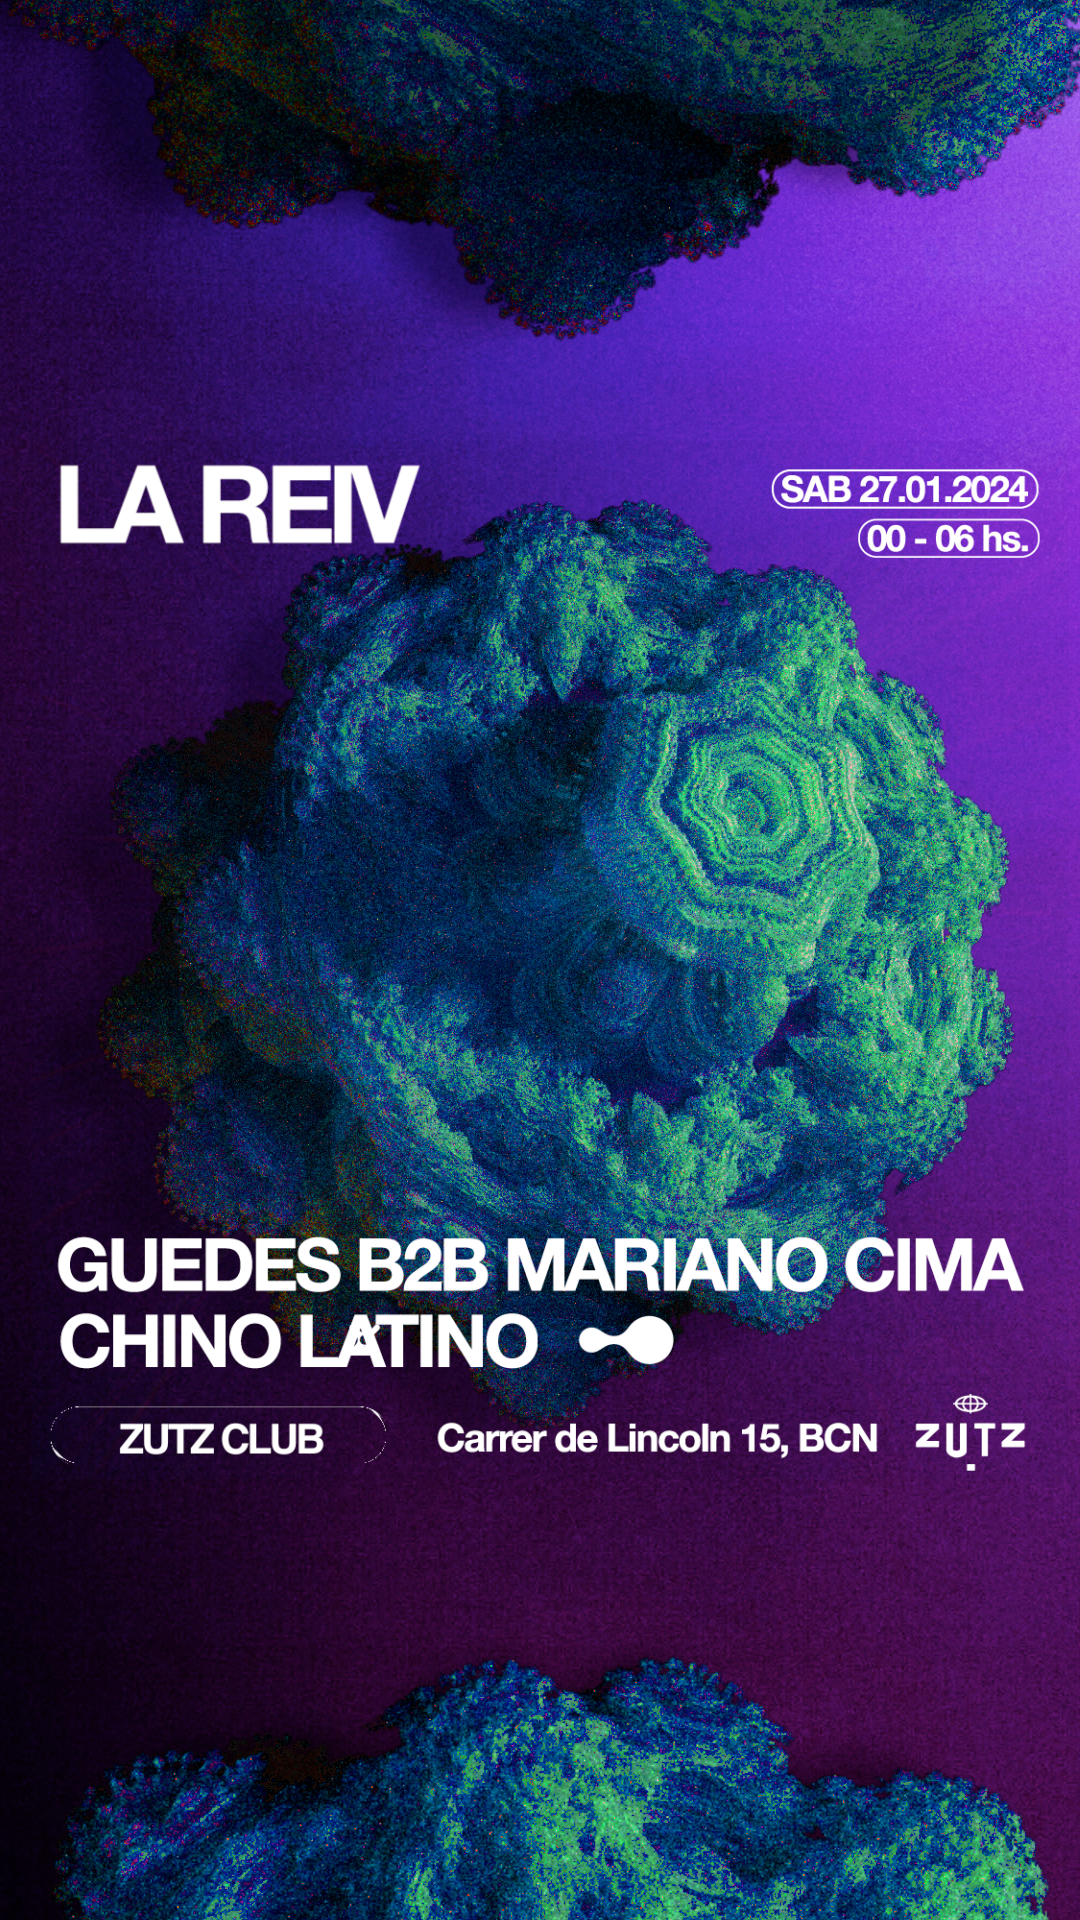 Zutz Club: La Reiv with Guedes, Mariano Cima and Chino Latino - Página frontal